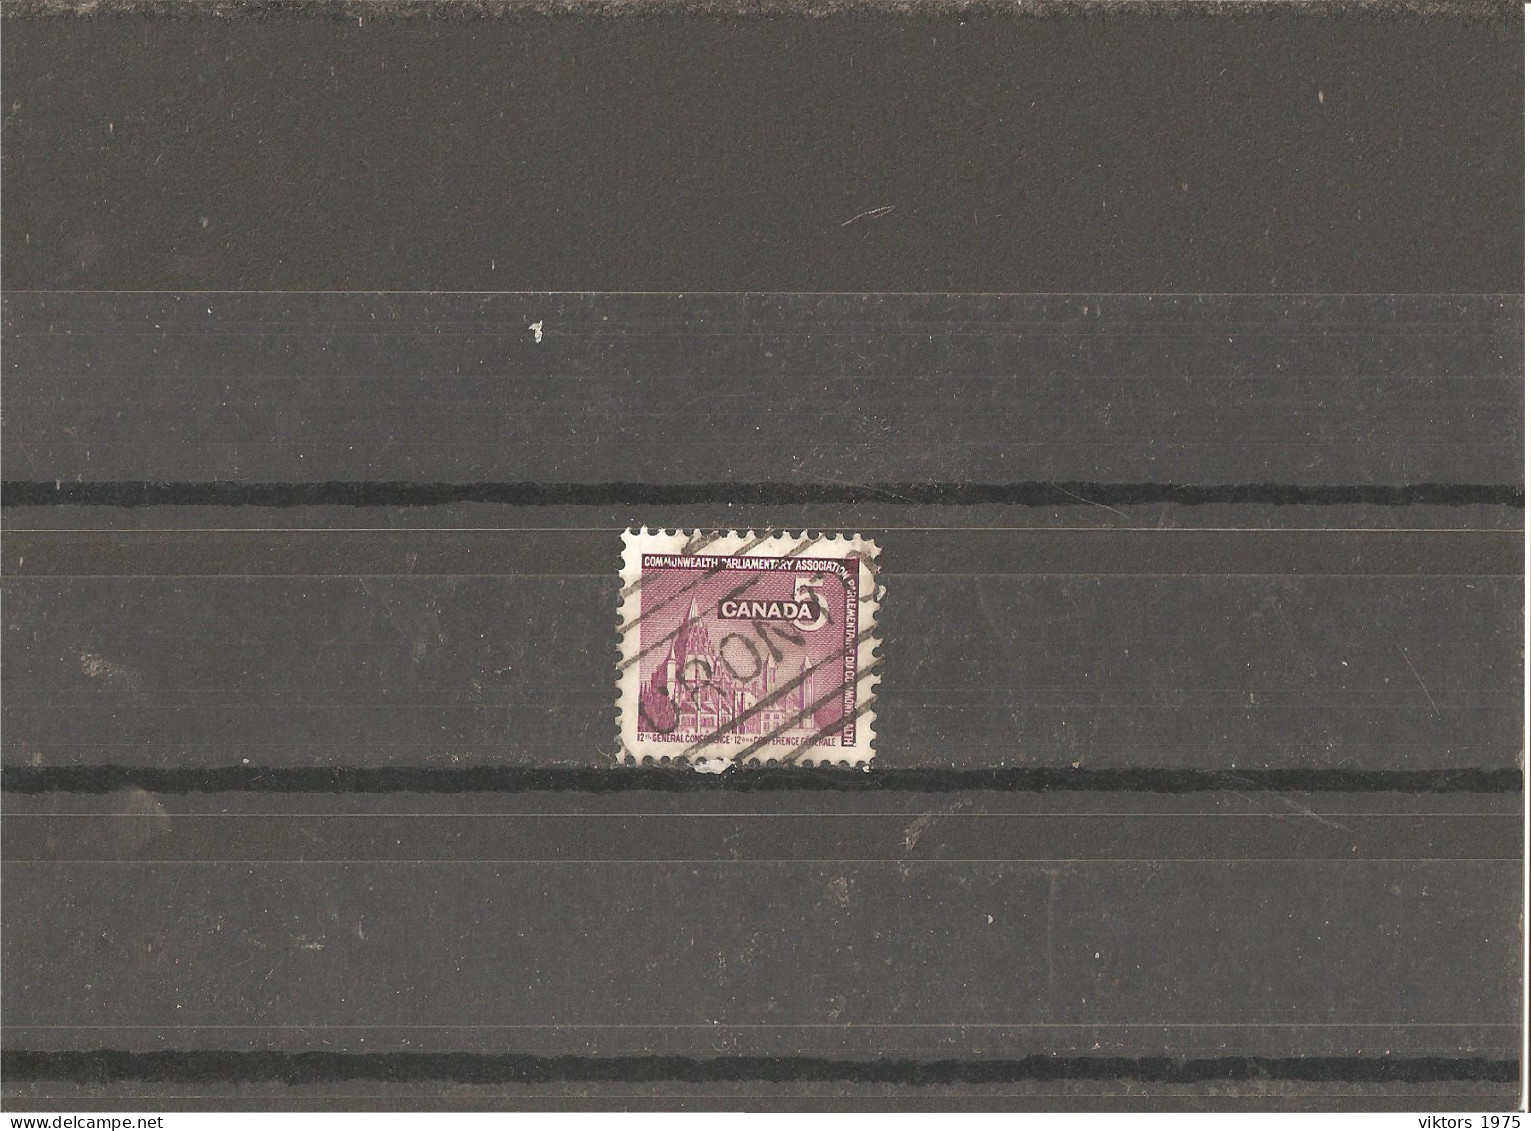 Used Stamp Nr.509 In Darnell Catalog  - Oblitérés